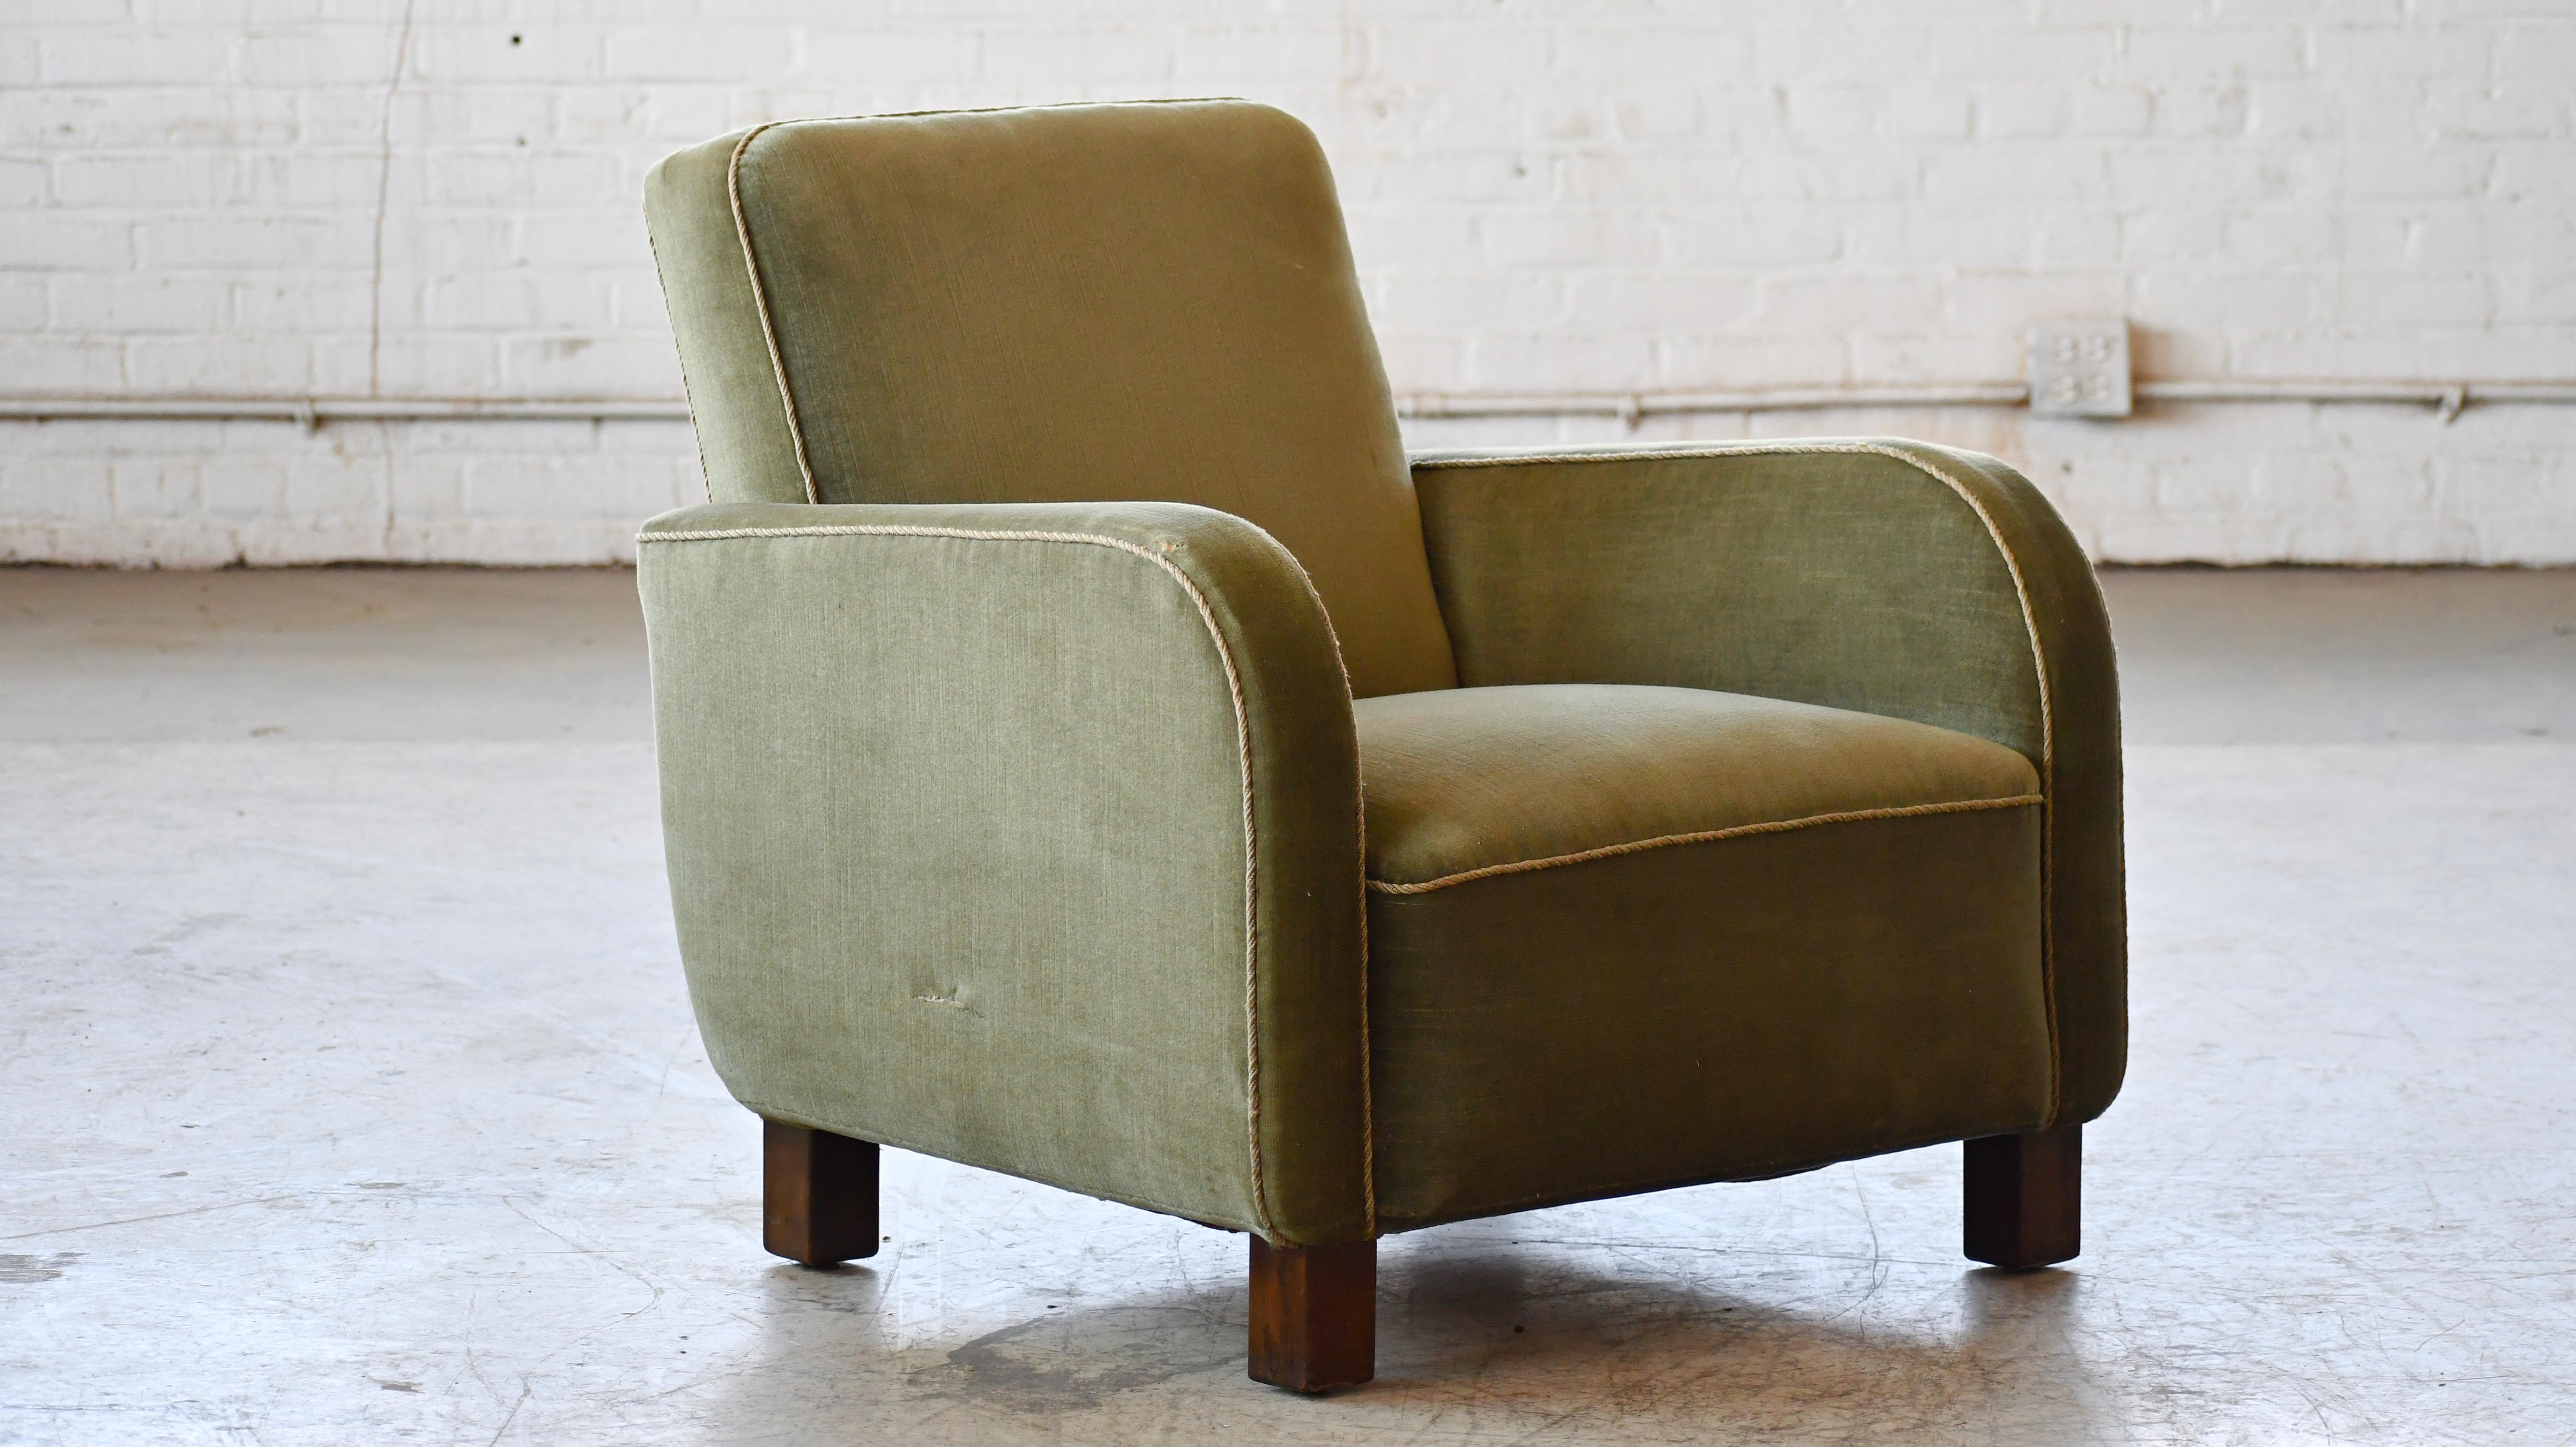 1930-40s Danish Art Deco or Early Midcentury Lounge Chair in Green Mohair For Sale 1